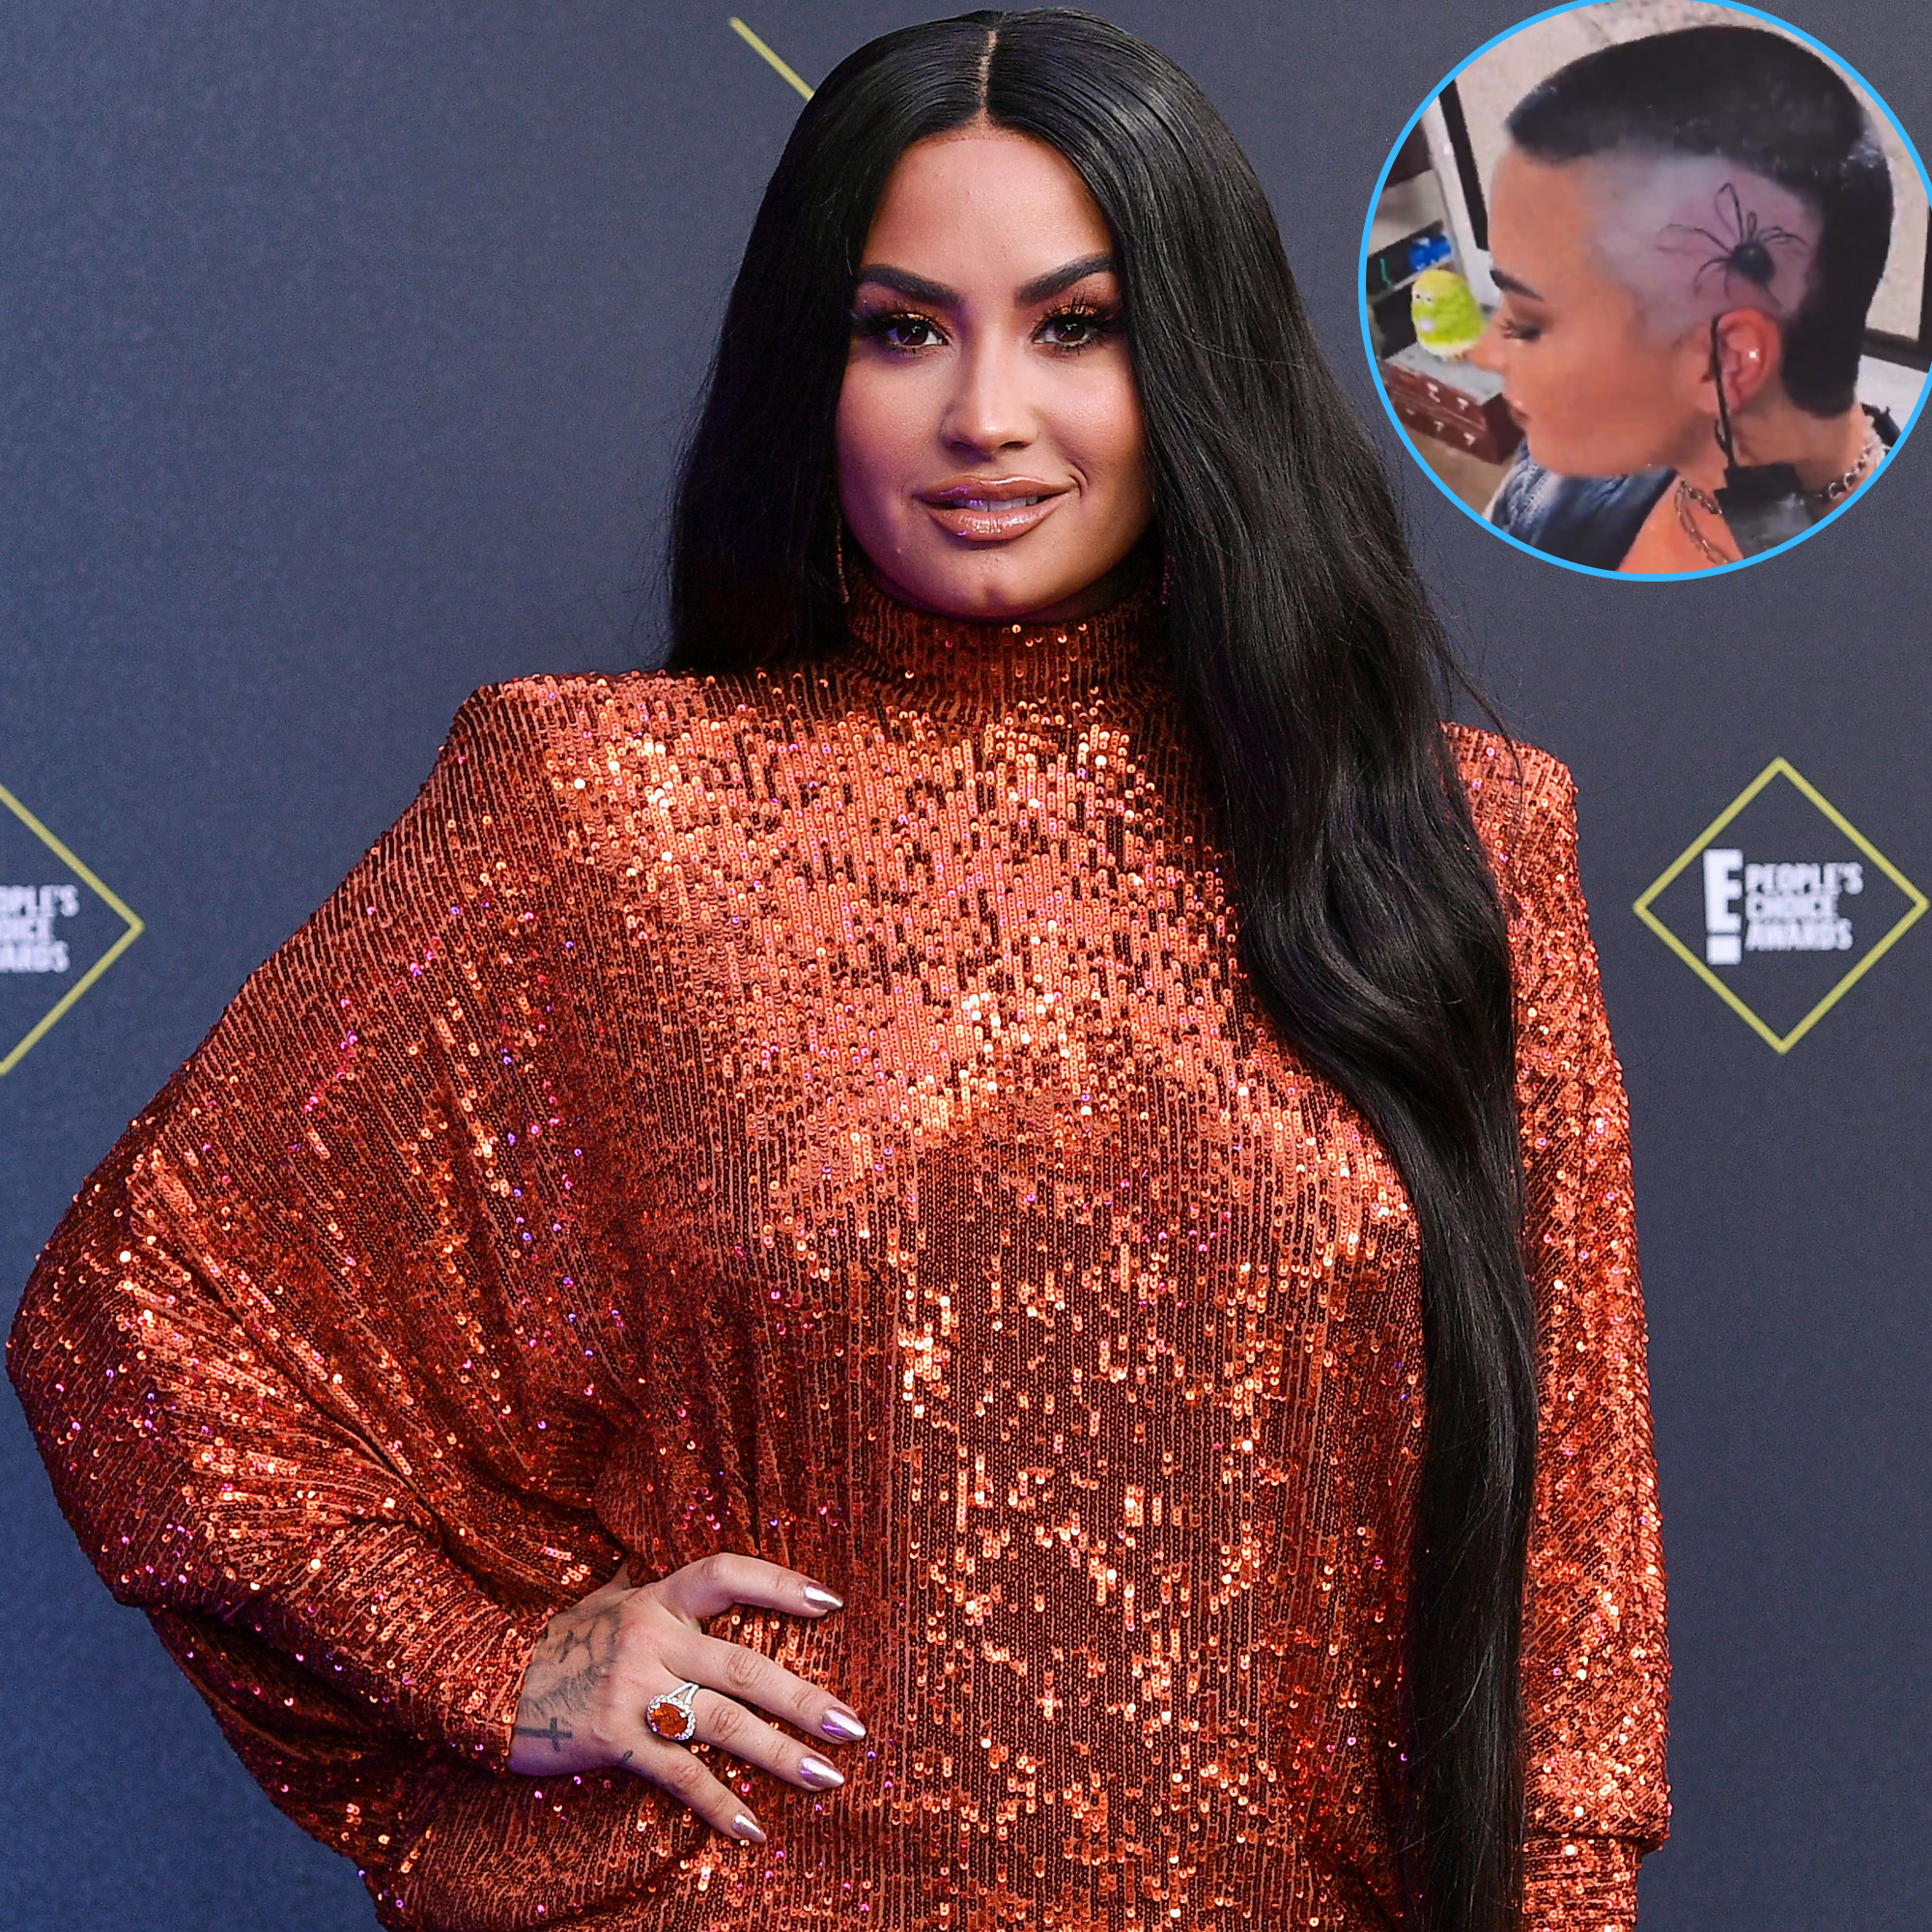 What Does Demi Lovato's Spider Tattoo Mean Head Piece Explained